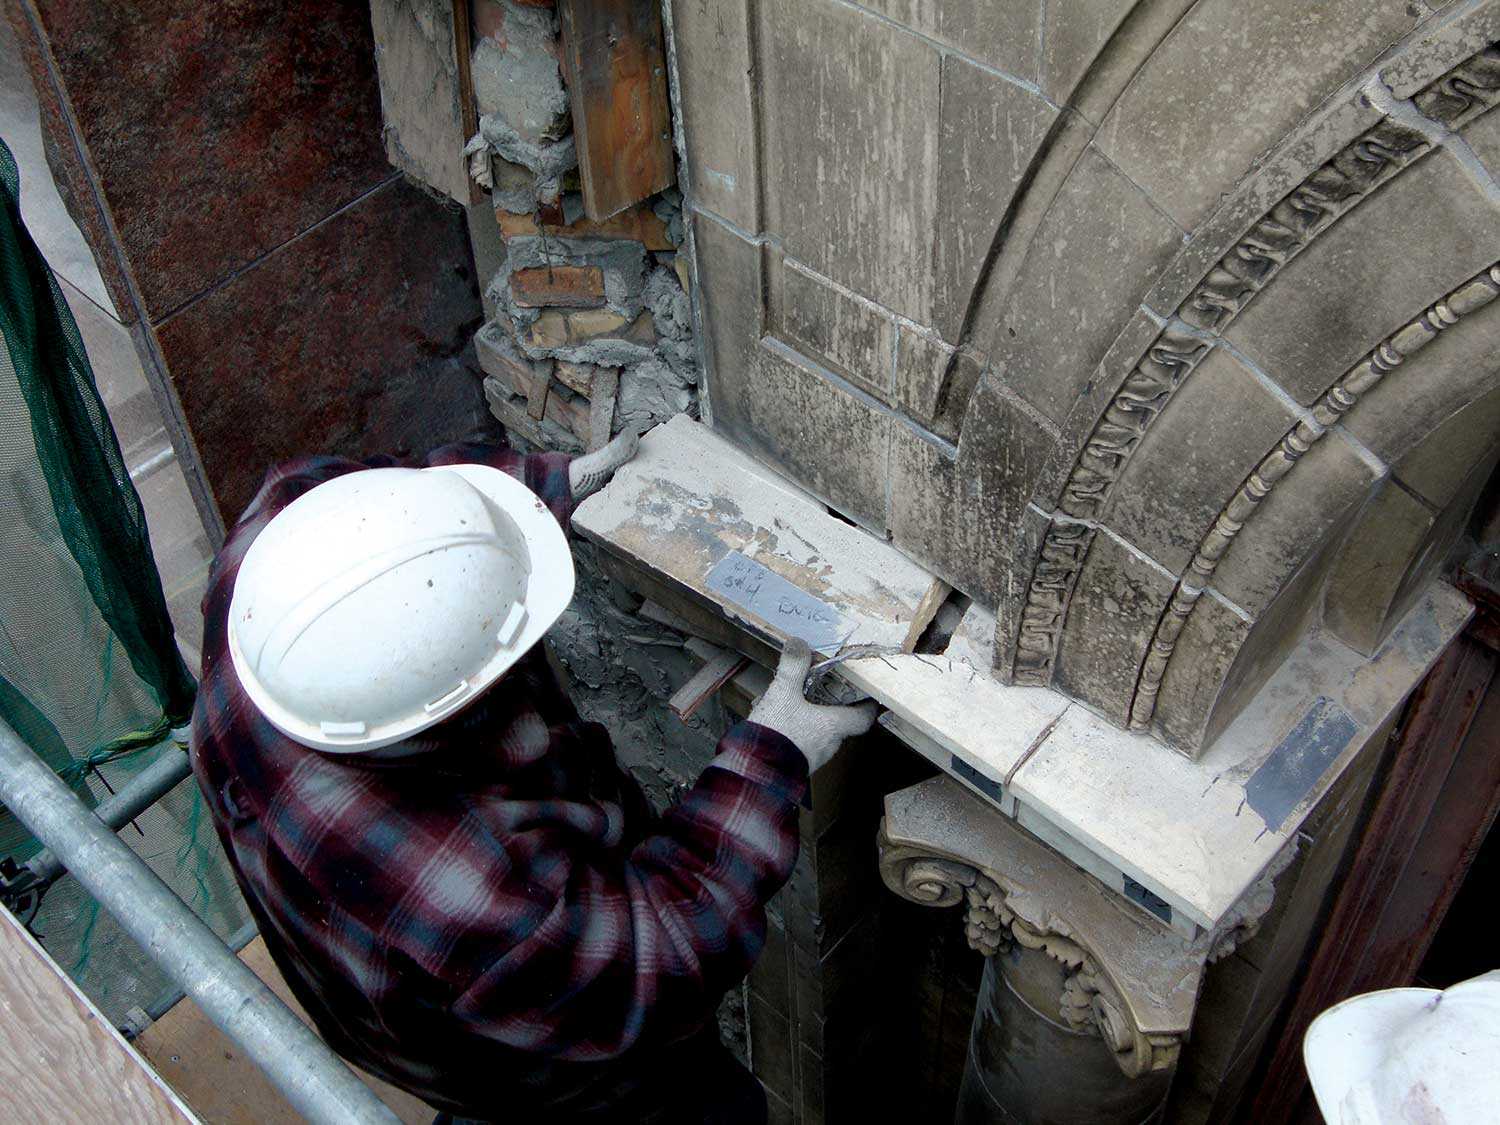 Dismantling select terra cotta pieces in the façade of Toronto’s Elgin and Winter Garden Theatre Centre that are deteriorated and require replacement.